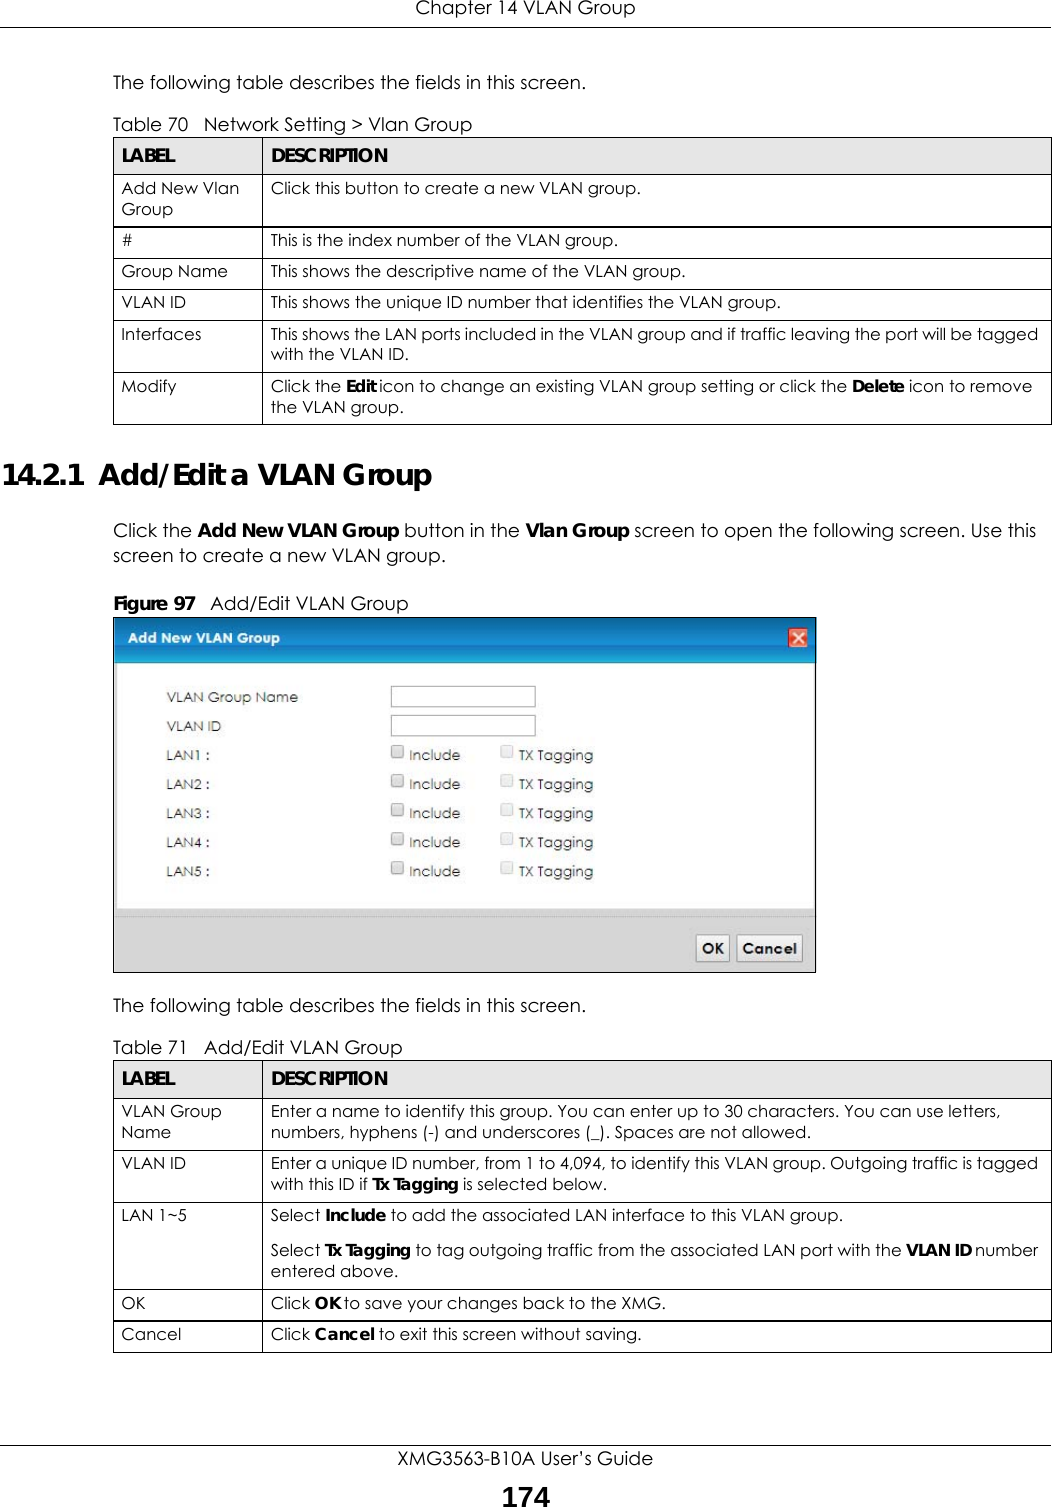 Chapter 14 VLAN GroupXMG3563-B10A User’s Guide174The following table describes the fields in this screen. 14.2.1  Add/Edit a VLAN Group Click the Add New VLAN Group button in the Vlan Group screen to open the following screen. Use this screen to create a new VLAN group. Figure 97   Add/Edit VLAN Group The following table describes the fields in this screen. Table 70   Network Setting &gt; Vlan GroupLABEL DESCRIPTIONAdd New Vlan GroupClick this button to create a new VLAN group.#This is the index number of the VLAN group.Group Name This shows the descriptive name of the VLAN group.VLAN ID This shows the unique ID number that identifies the VLAN group.Interfaces This shows the LAN ports included in the VLAN group and if traffic leaving the port will be tagged with the VLAN ID.Modify Click the Edit icon to change an existing VLAN group setting or click the Delete icon to remove the VLAN group.Table 71   Add/Edit VLAN GroupLABEL DESCRIPTIONVLAN Group NameEnter a name to identify this group. You can enter up to 30 characters. You can use letters, numbers, hyphens (-) and underscores (_). Spaces are not allowed.VLAN ID Enter a unique ID number, from 1 to 4,094, to identify this VLAN group. Outgoing traffic is tagged with this ID if Tx Tagging is selected below.LAN 1~5 Select Include to add the associated LAN interface to this VLAN group.Select Tx Tagging to tag outgoing traffic from the associated LAN port with the VLAN ID number entered above.OK Click OK to save your changes back to the XMG.Cancel Click Cancel to exit this screen without saving.